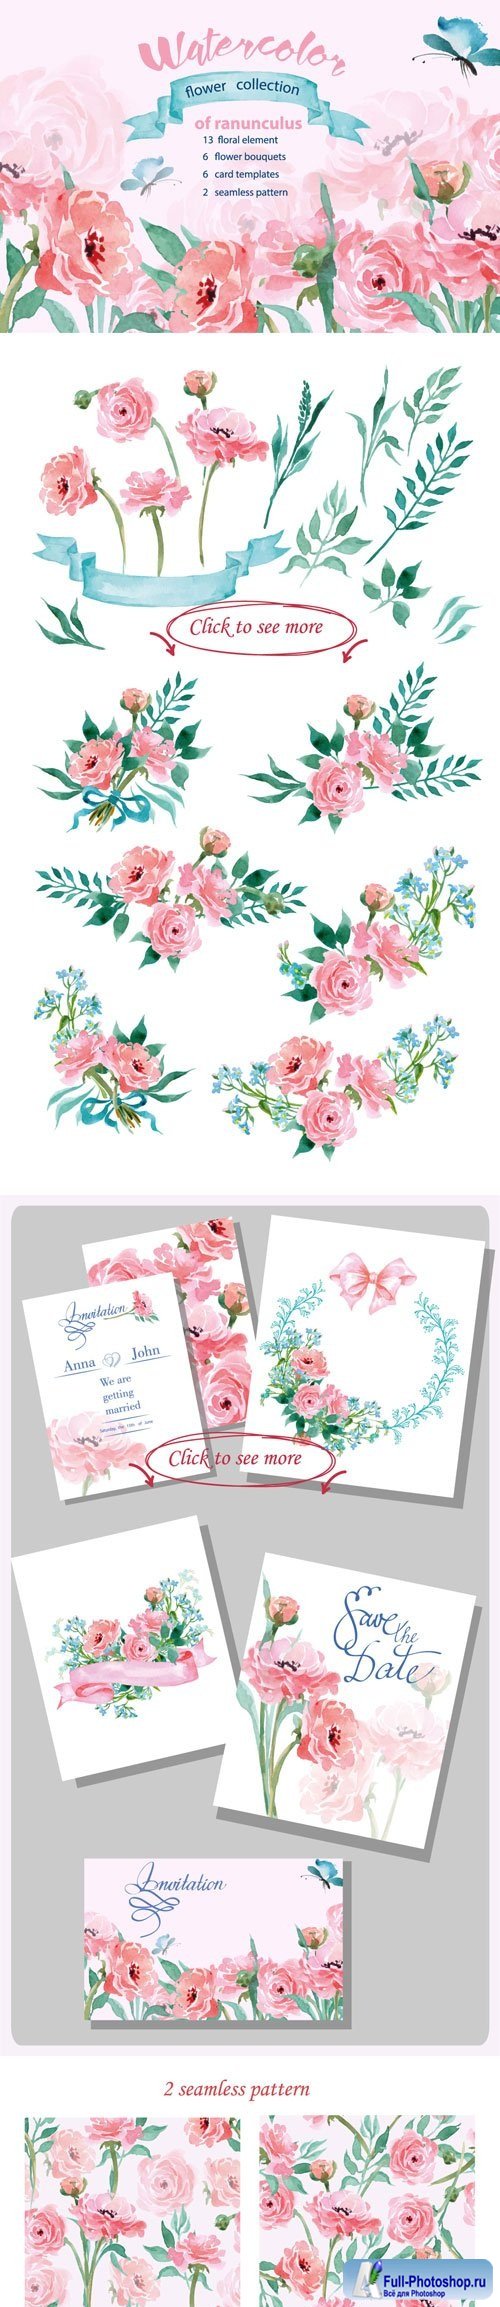 EM 468576 Watercolor flower collection of ranu